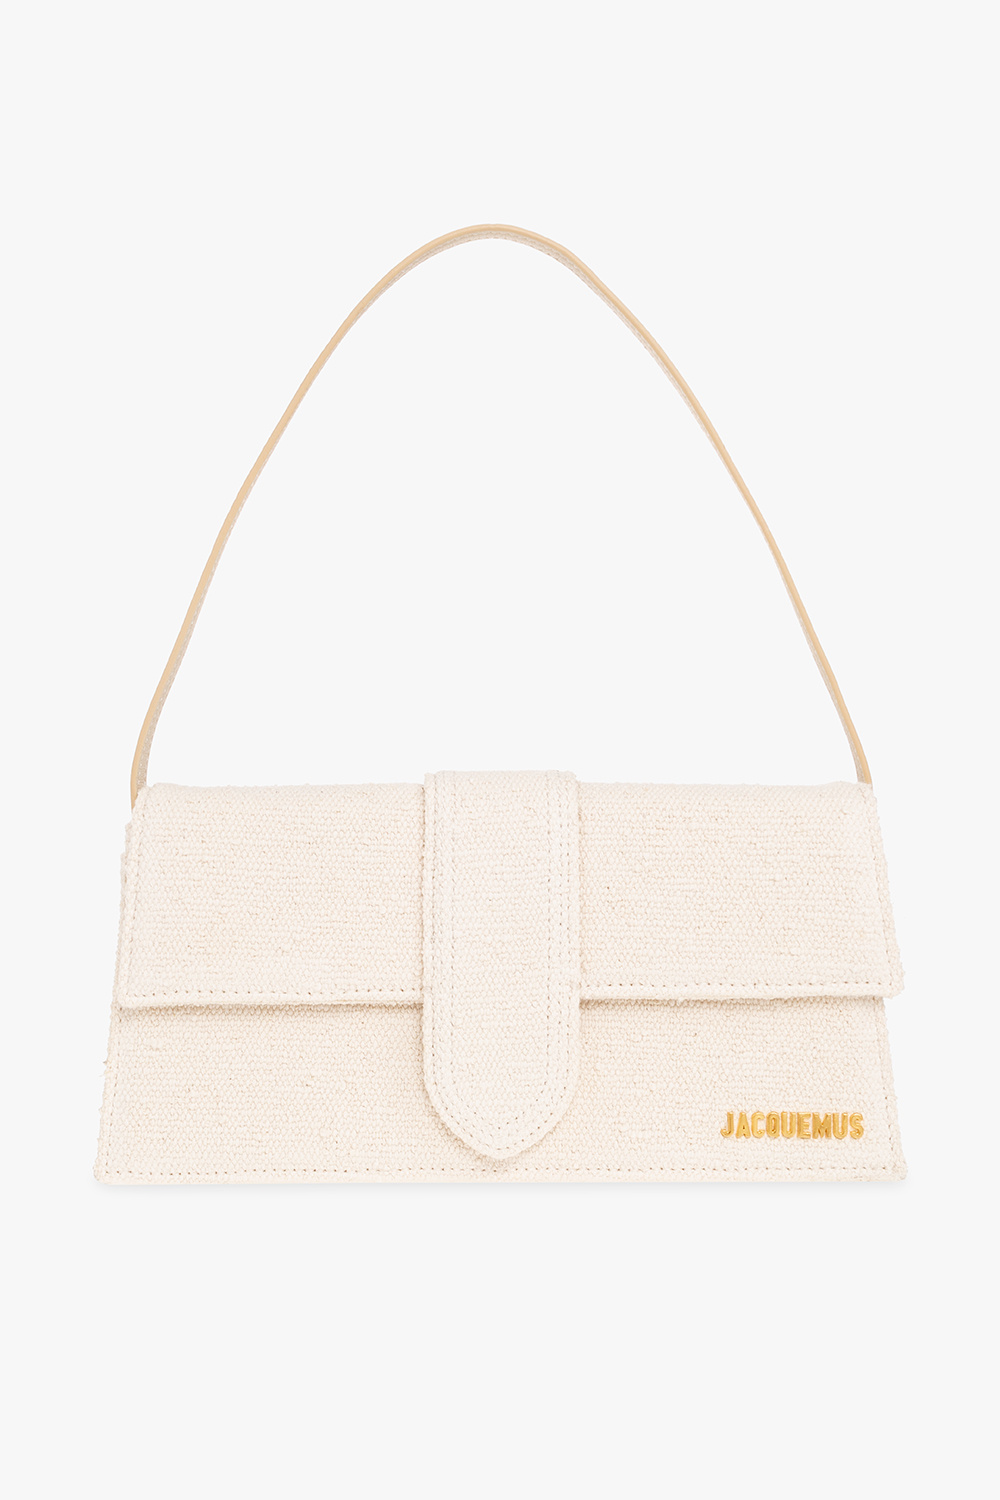 What do you all think of the Alma BB Monogram €1300 vs Jacquemus